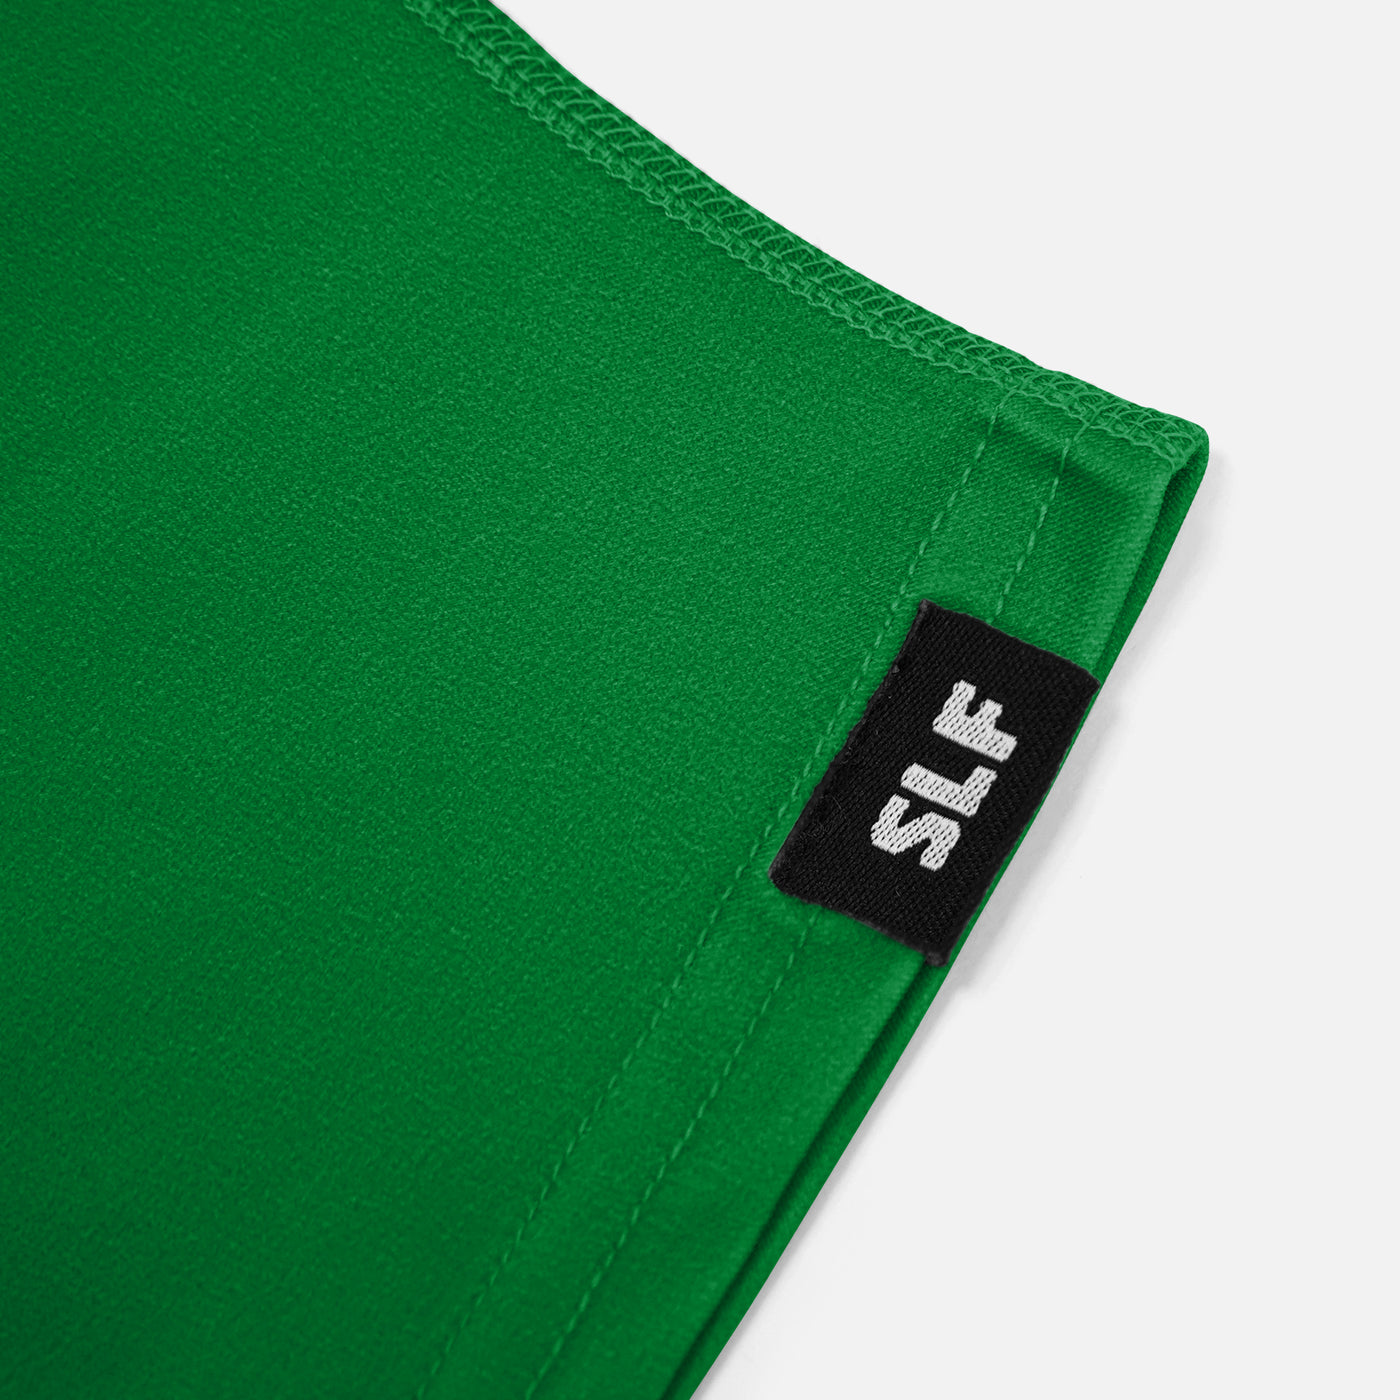 Hue Green Kids Spats / Cleat Covers